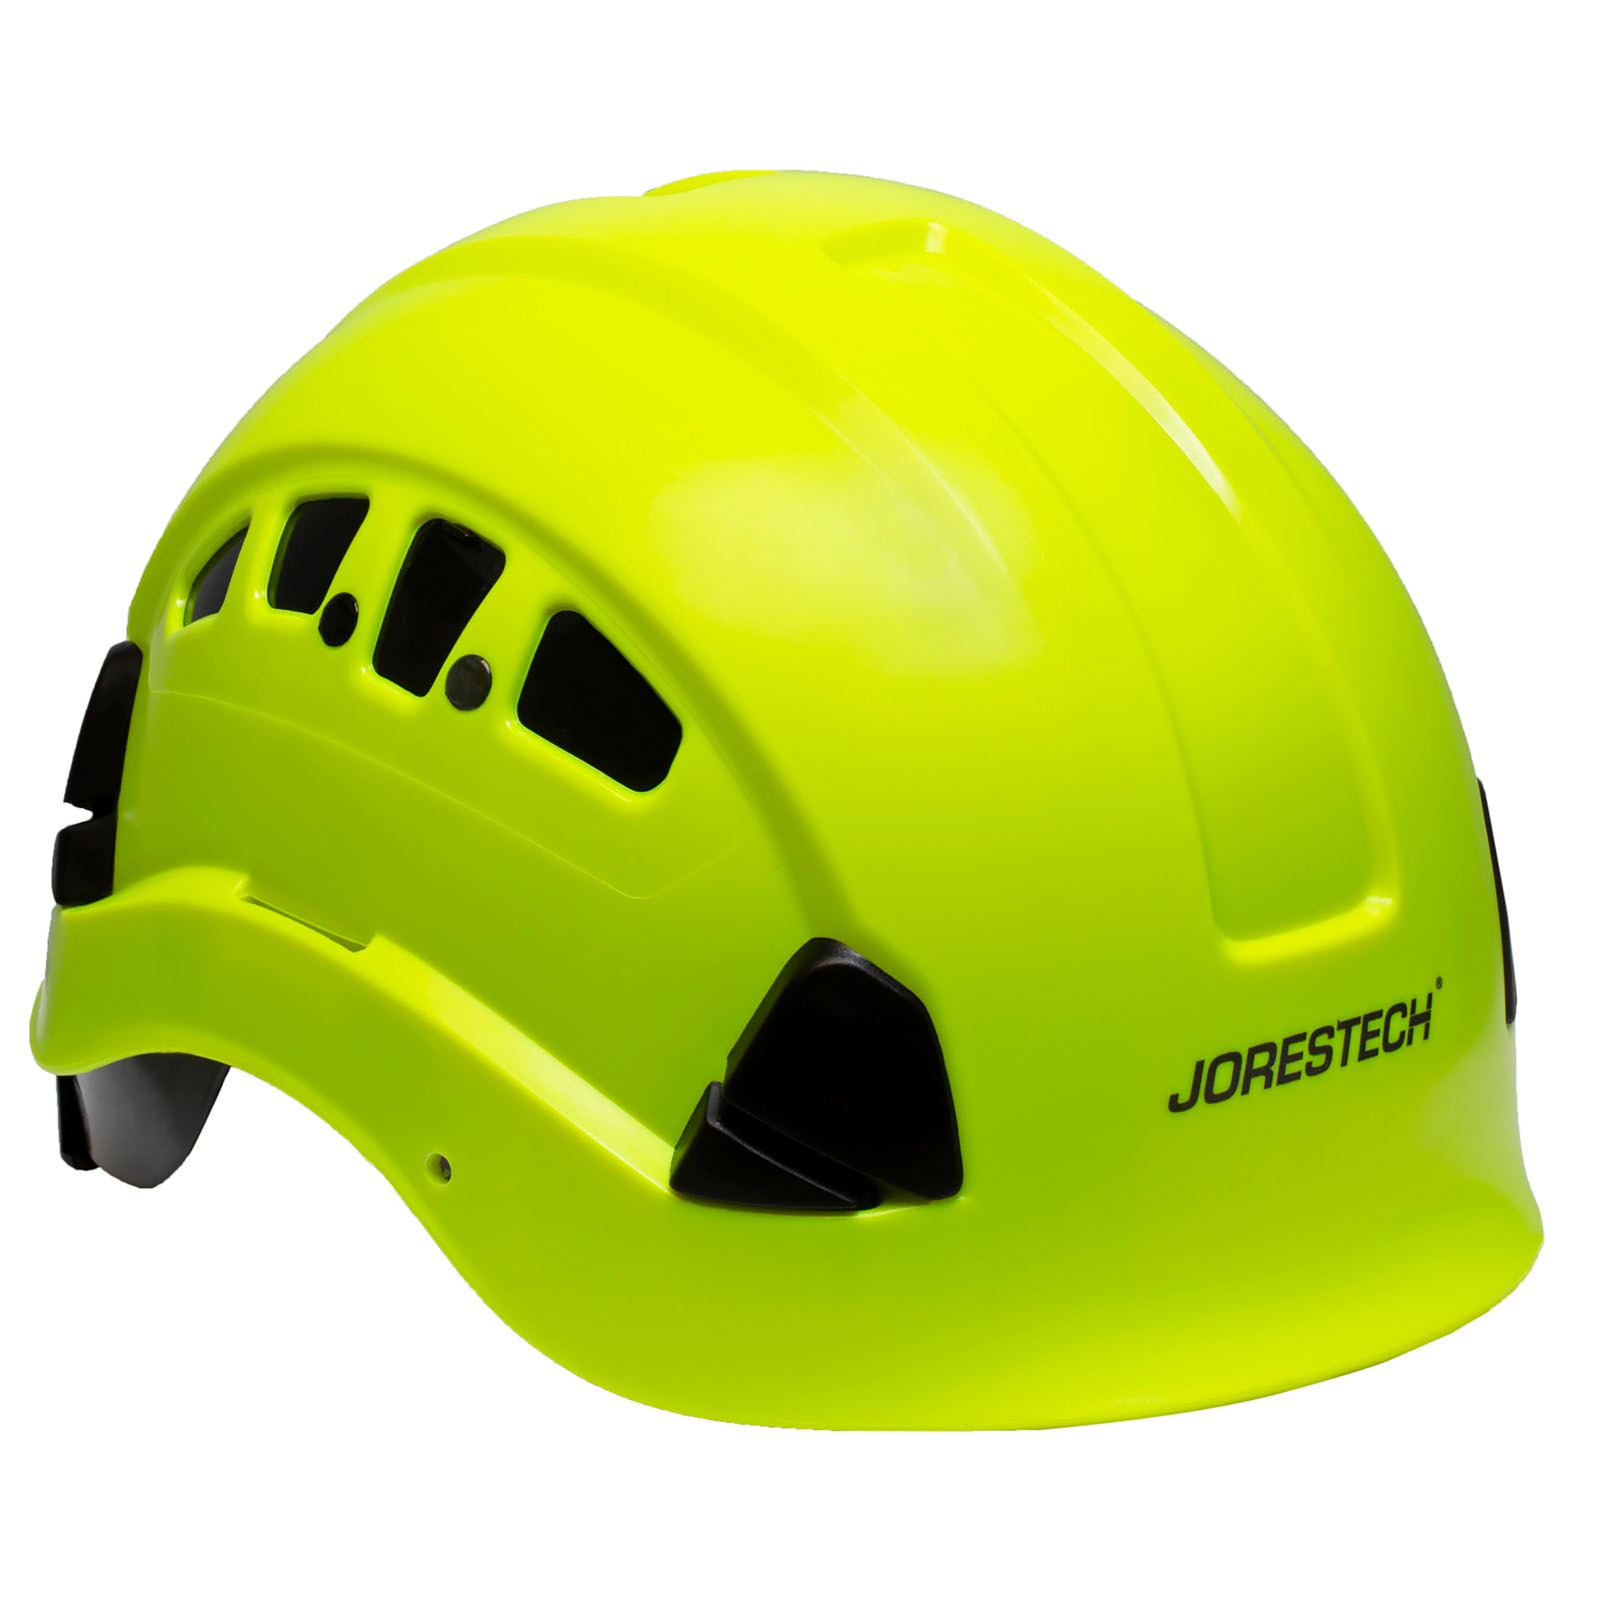 Diagonal view of the Jorestech lime ventilated rescue hard hat with adjustable 6 point suspension